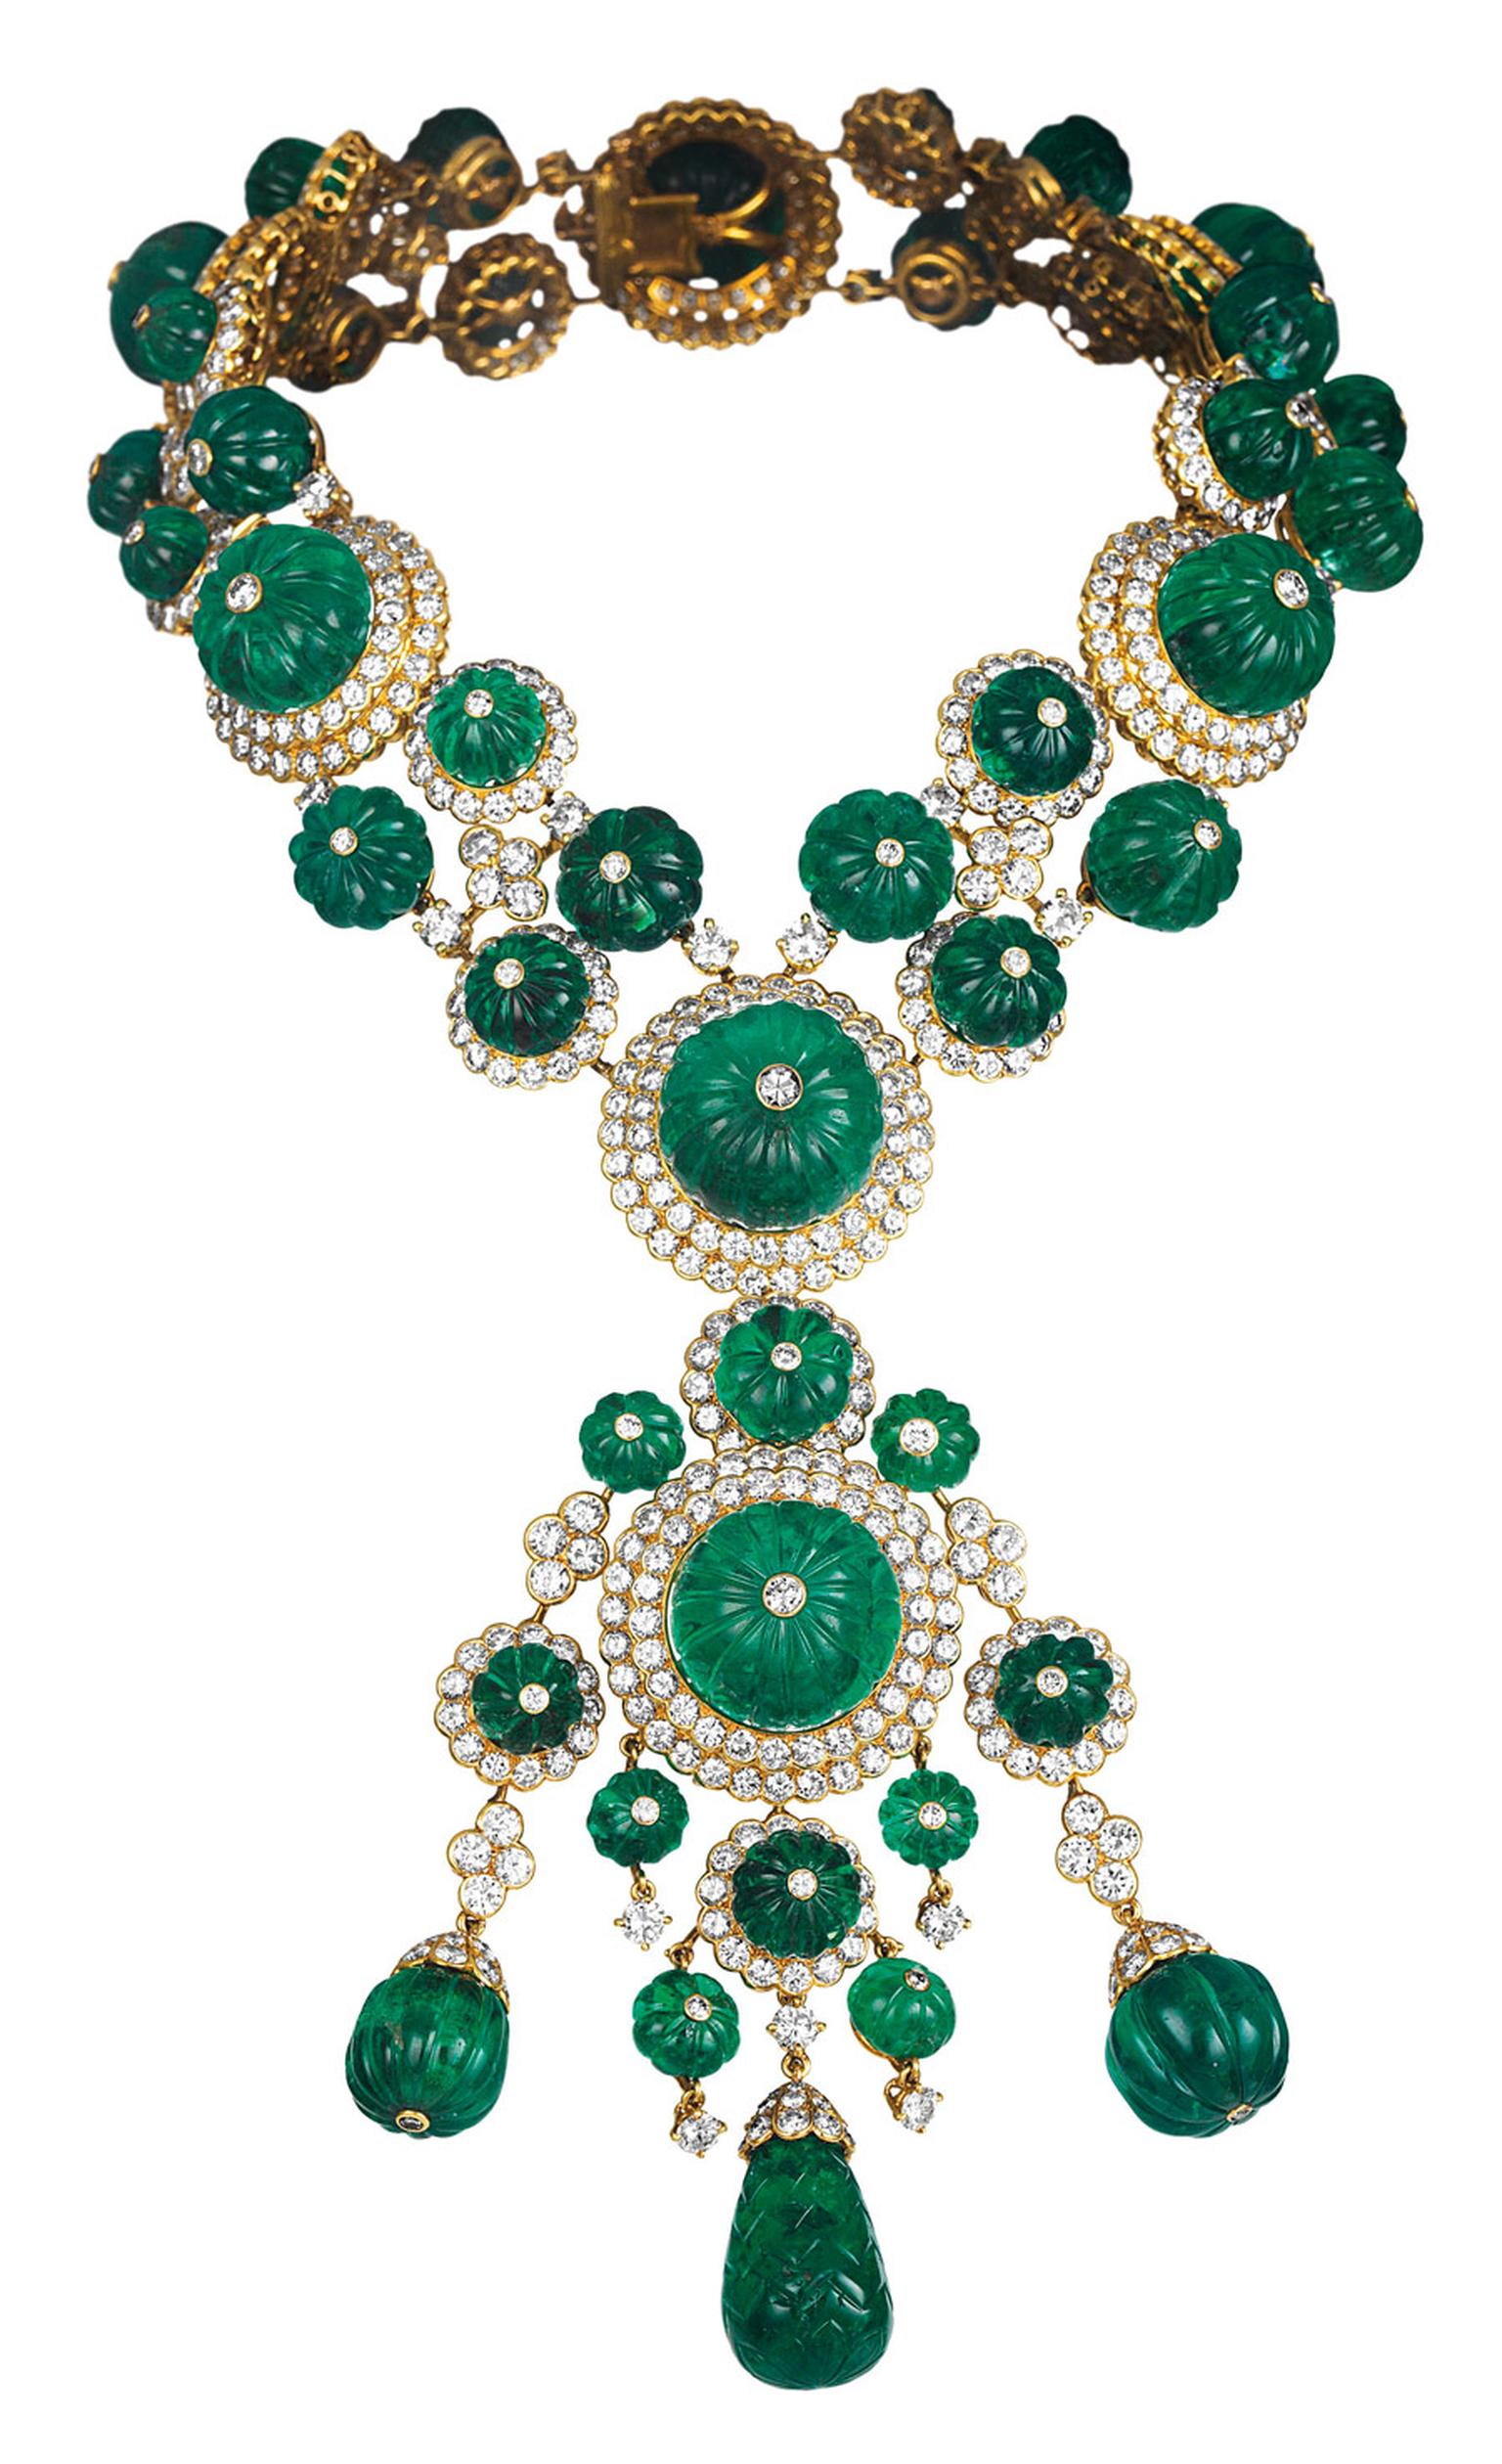 Van-Cleef-Arpels-Indian-necklace-transformable-into-two-bracelets-and-a-pendant-1971-Van-Cleef-Arpels-Collection_1.jpg